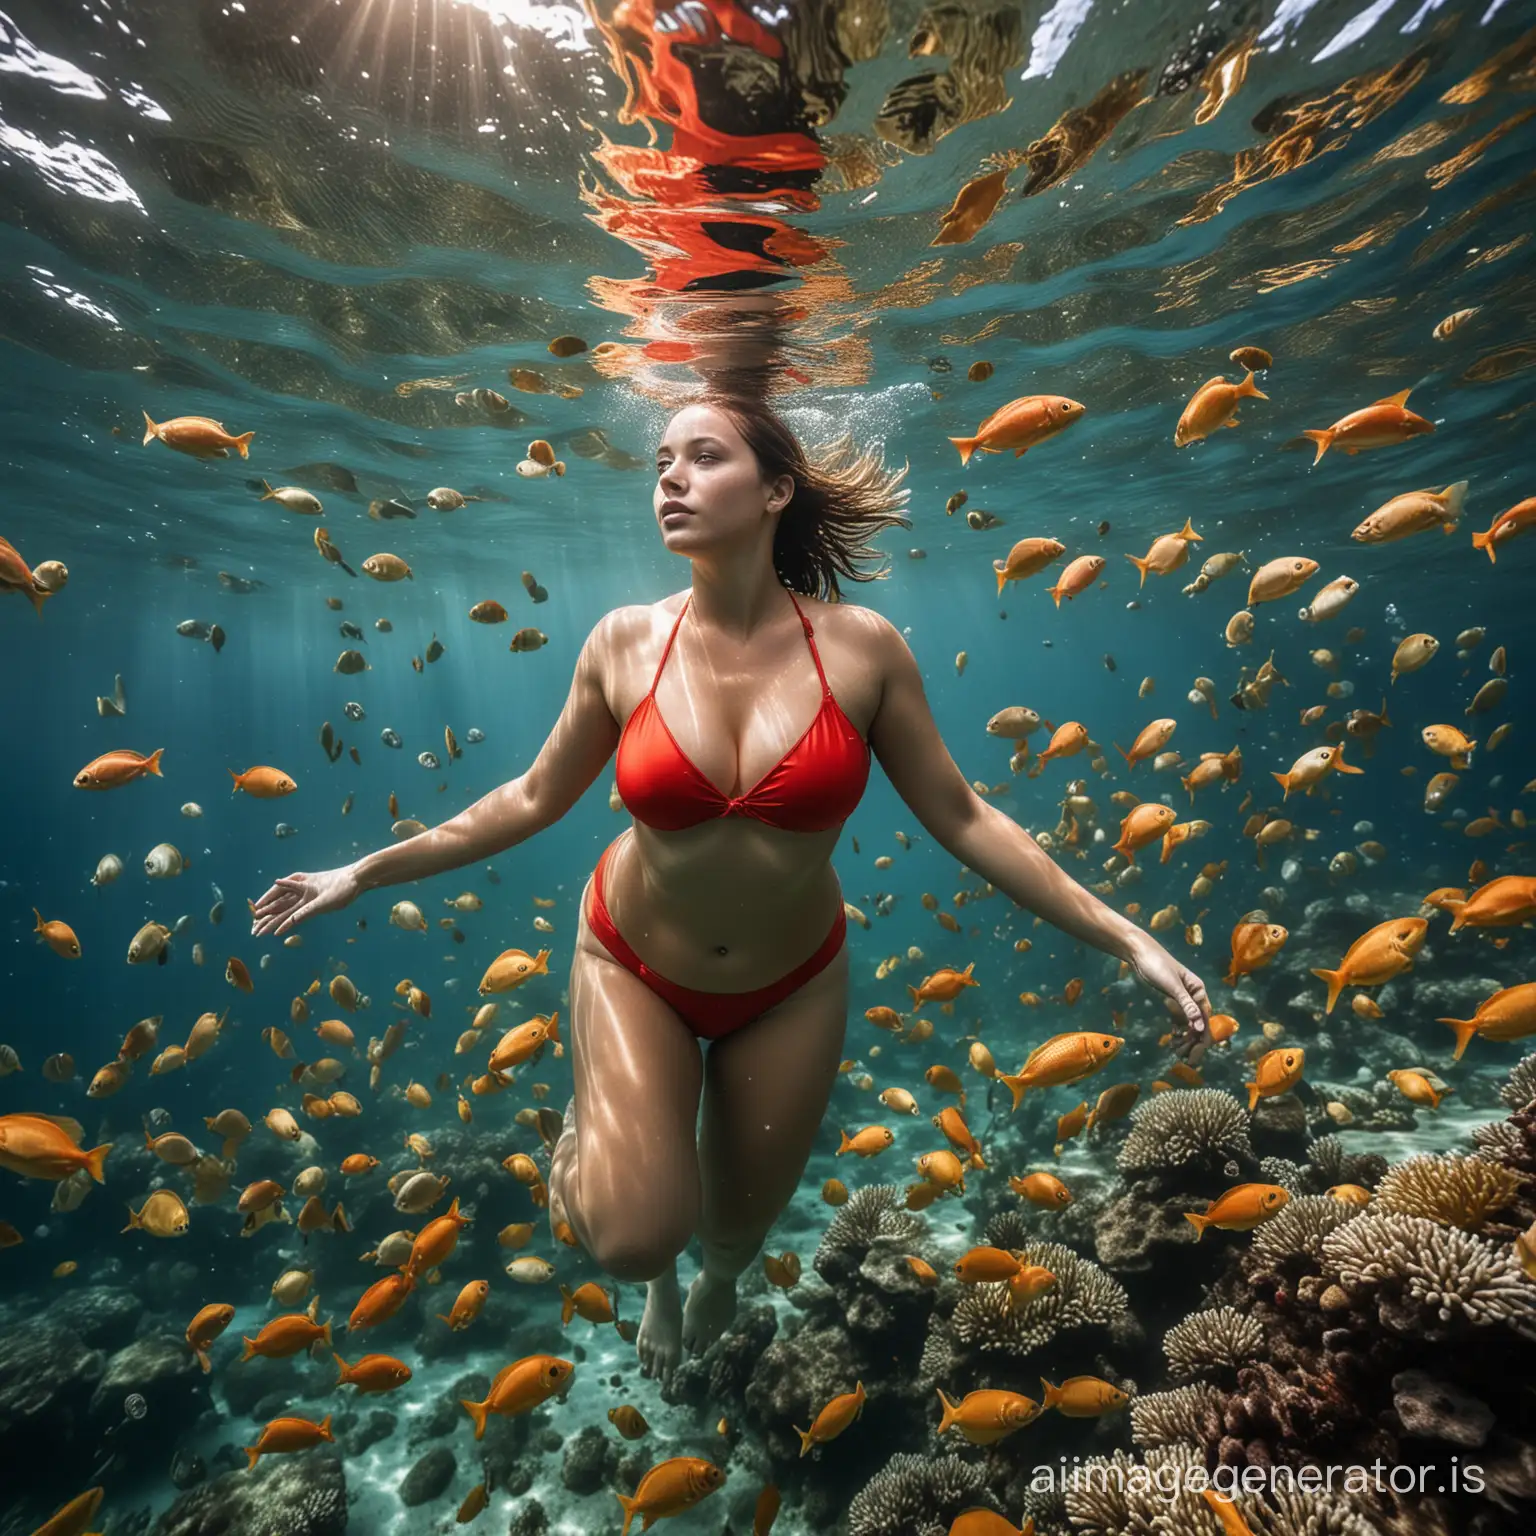 a photo of a female swimmer taken beneath her, she is wearing a red bikini that is too small, she is plump with very generous curves, the photo is taken underwater in the Indian Ocean with many fish of different colors: yellows, blues, oranges, greens, reds, presence of coral and algae